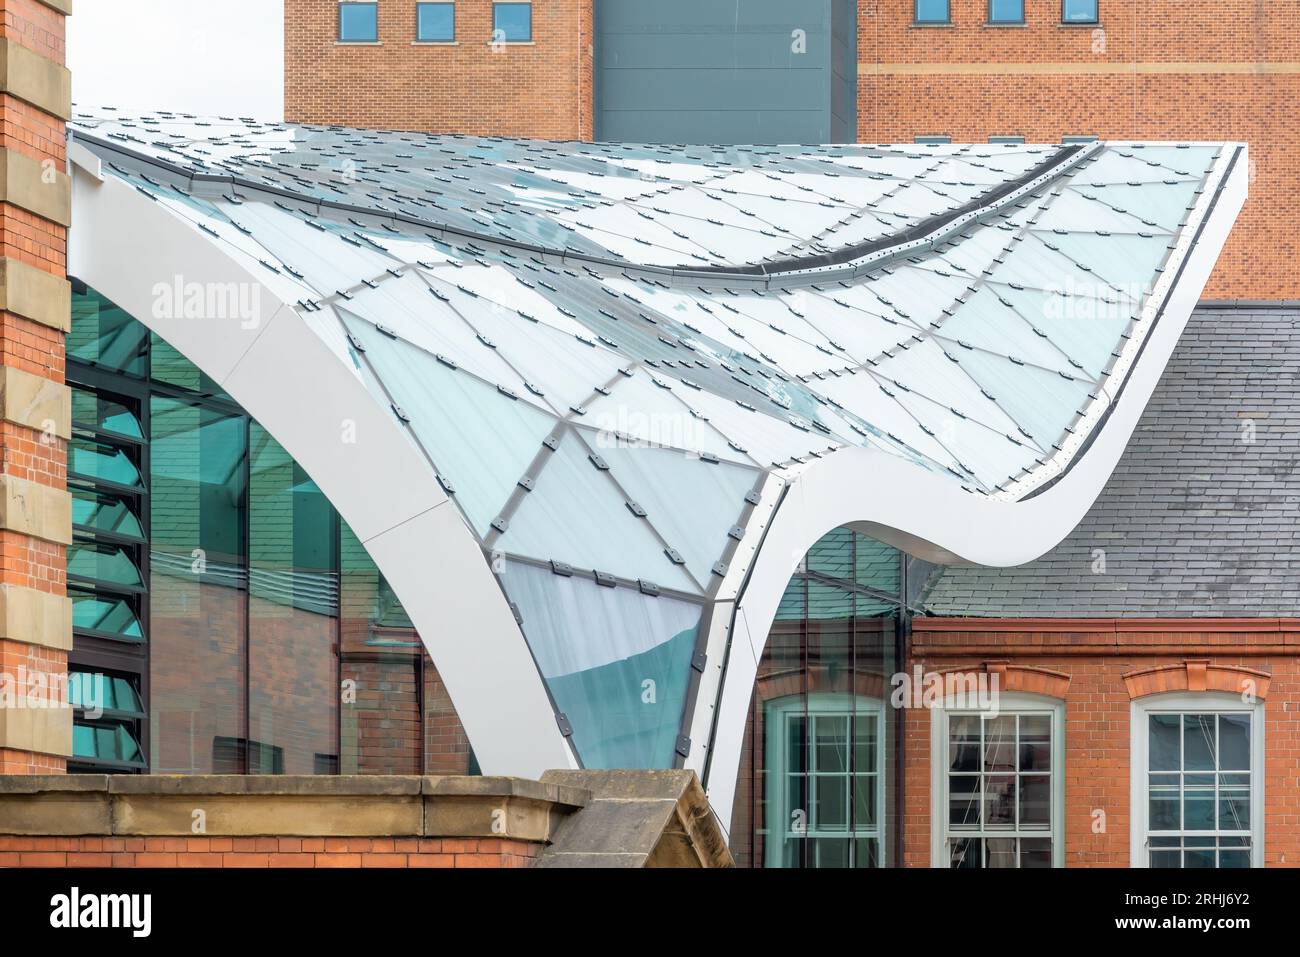 Sheffield, England - The Wave, Faculty of Social Sciences, Sheffield University by HLM Architects Stock Photo